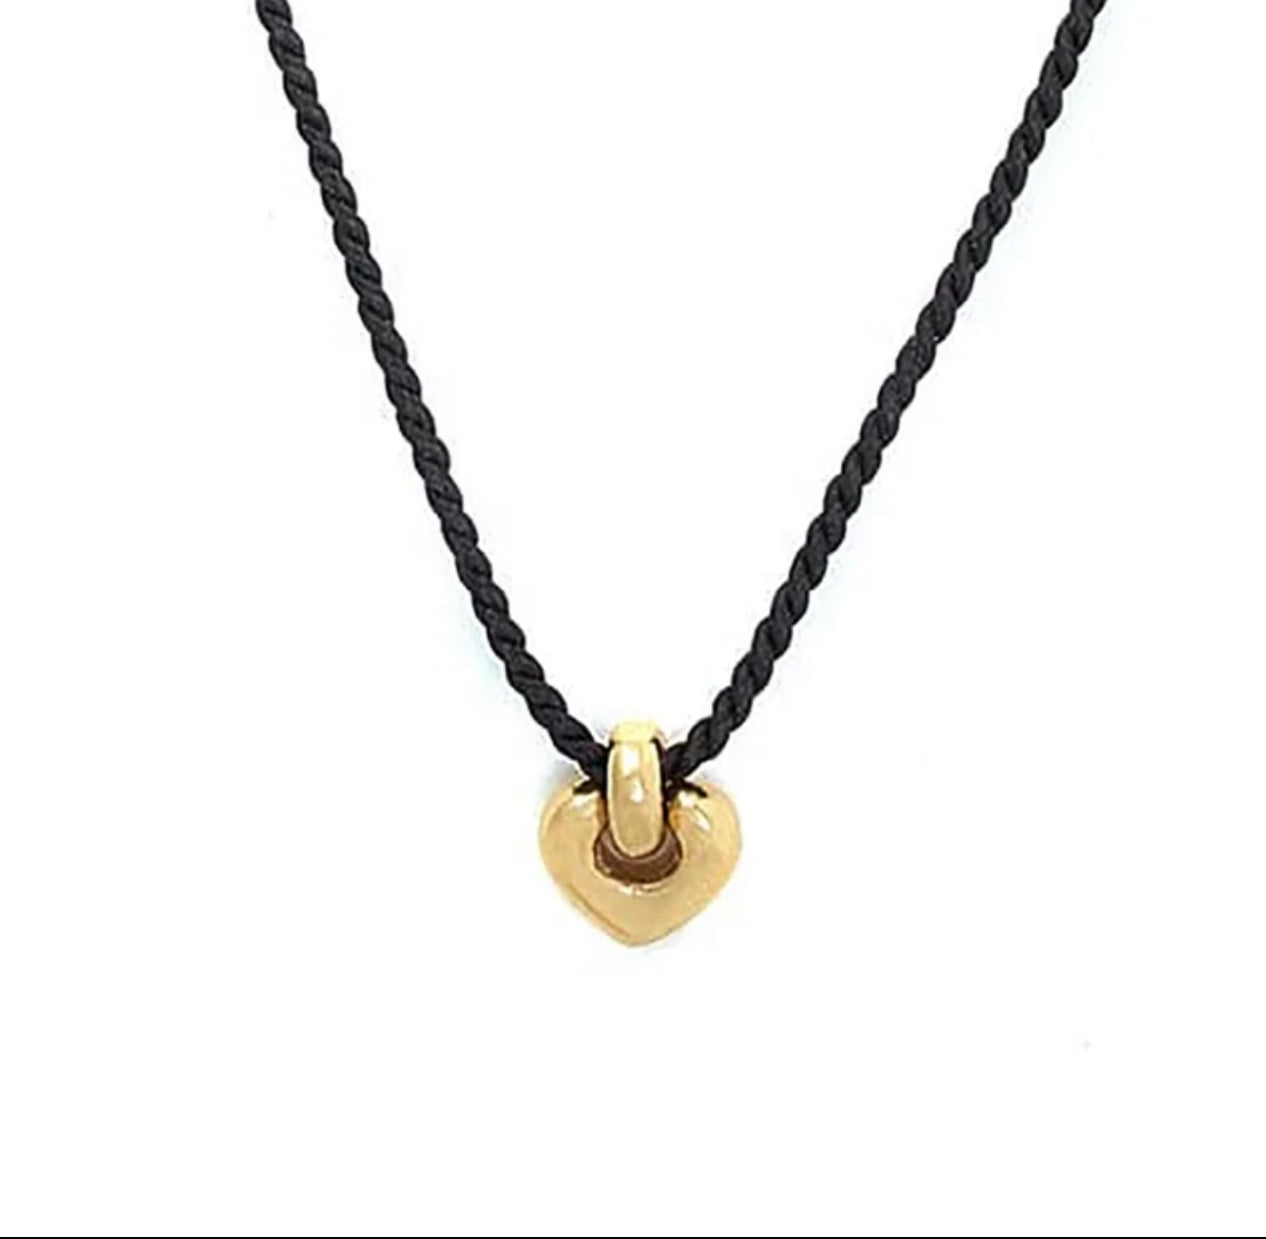 Heart on Black Rope Necklace 18K Yellow Gold Plated Over Sterling Silver